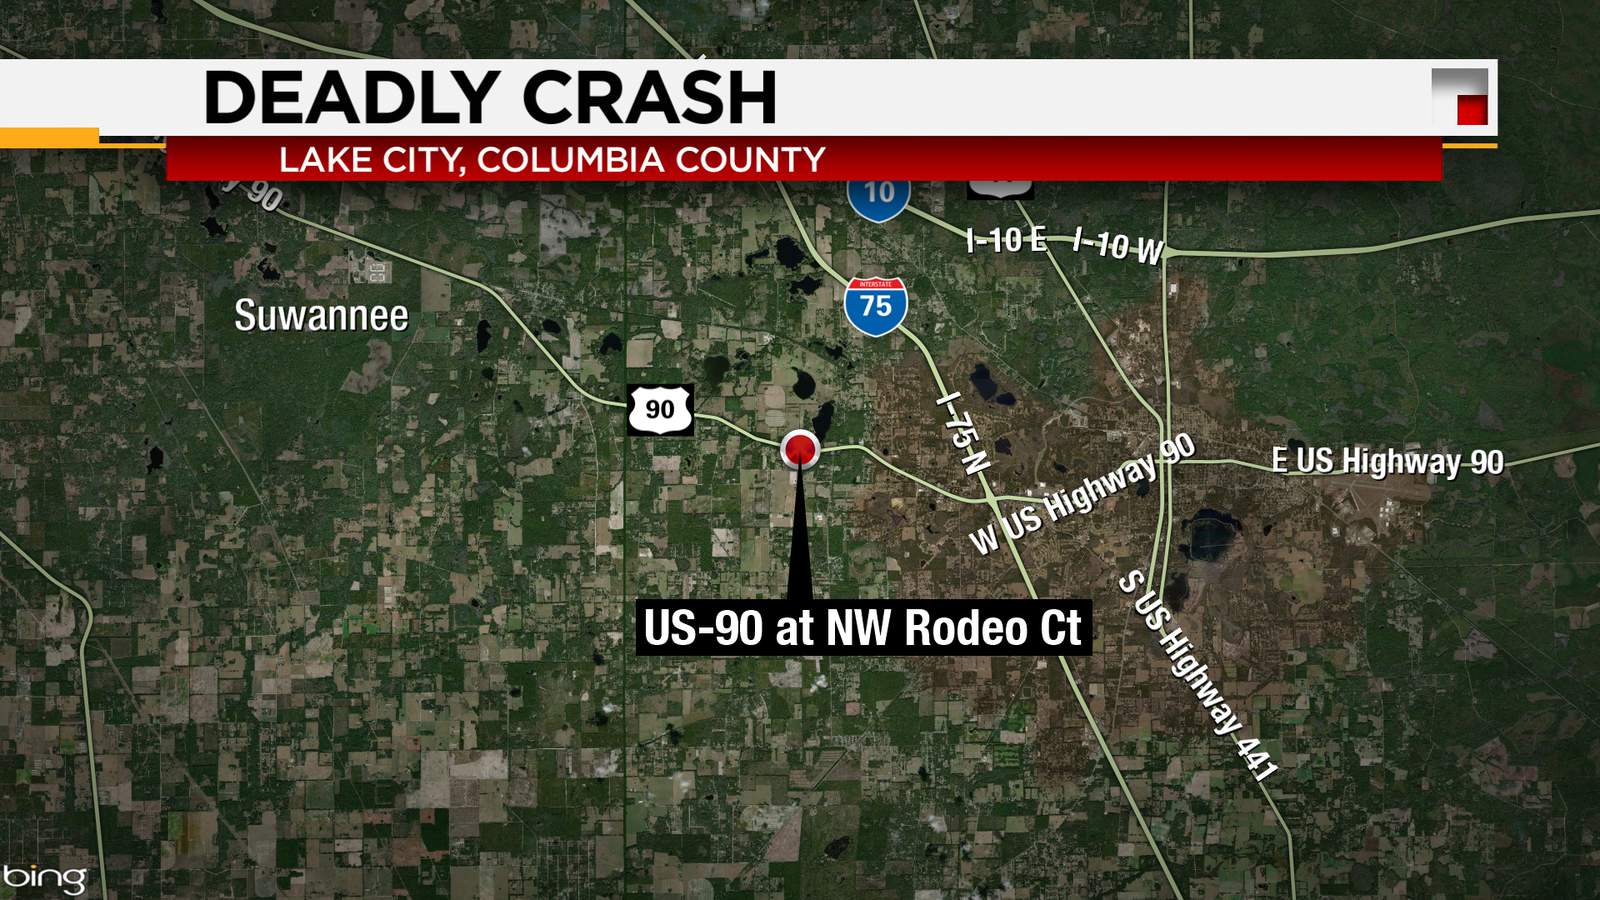 Lanes reopened after fatal crash in Lake City